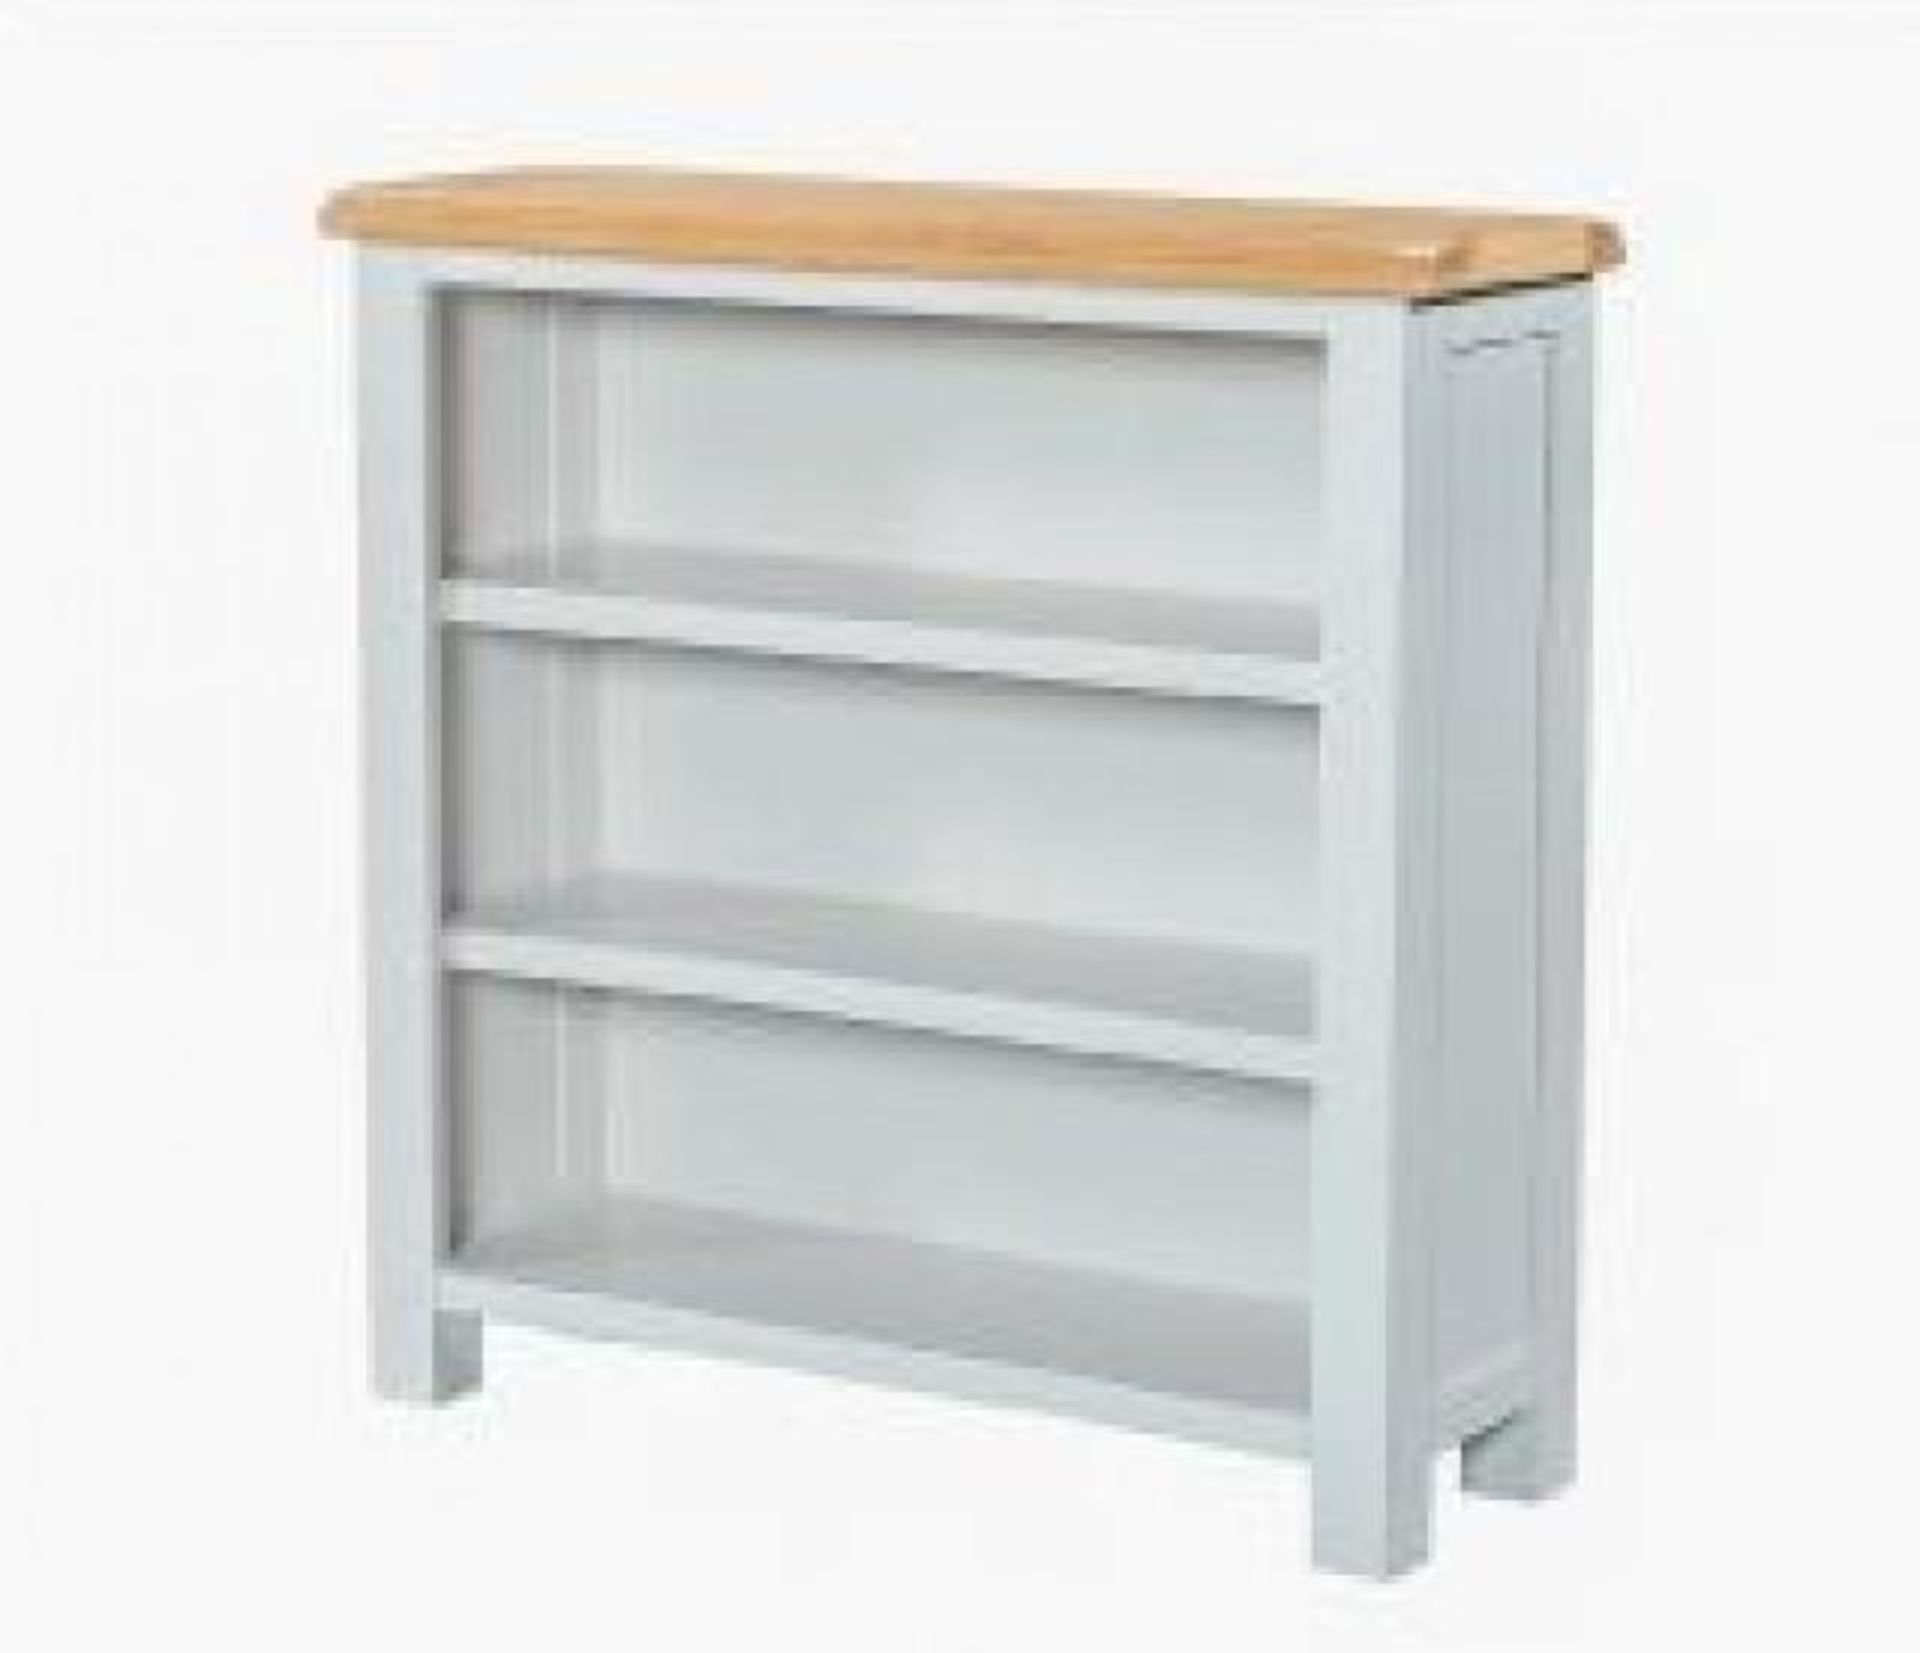 BRAND NEW & BOXED clevedon small bookcase